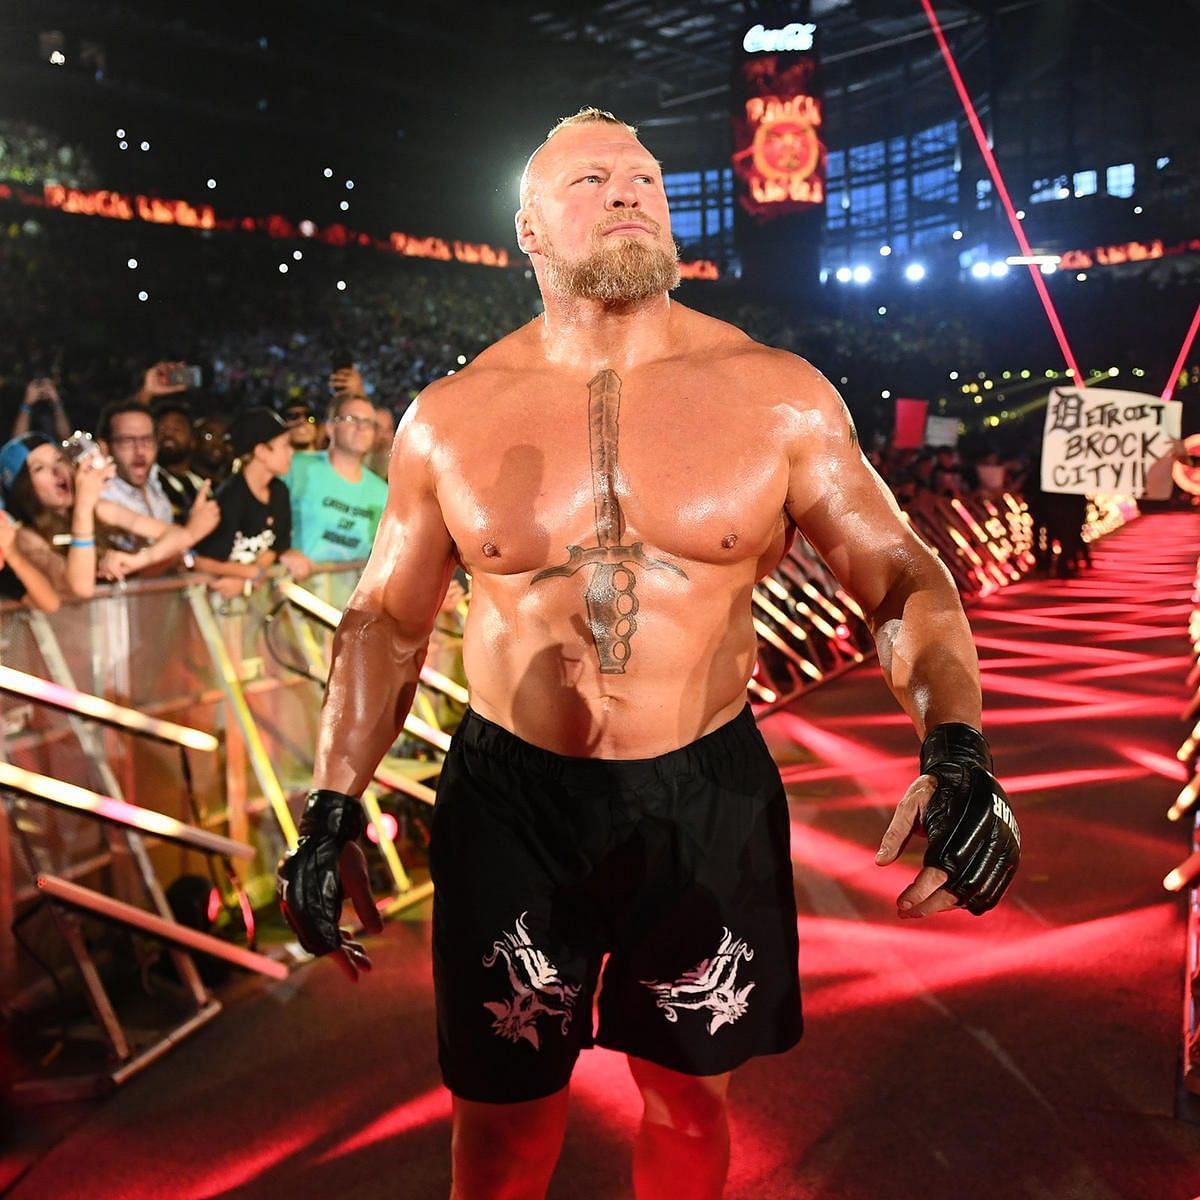 Brock Lesnar is one of the biggest names in pro wrestling.